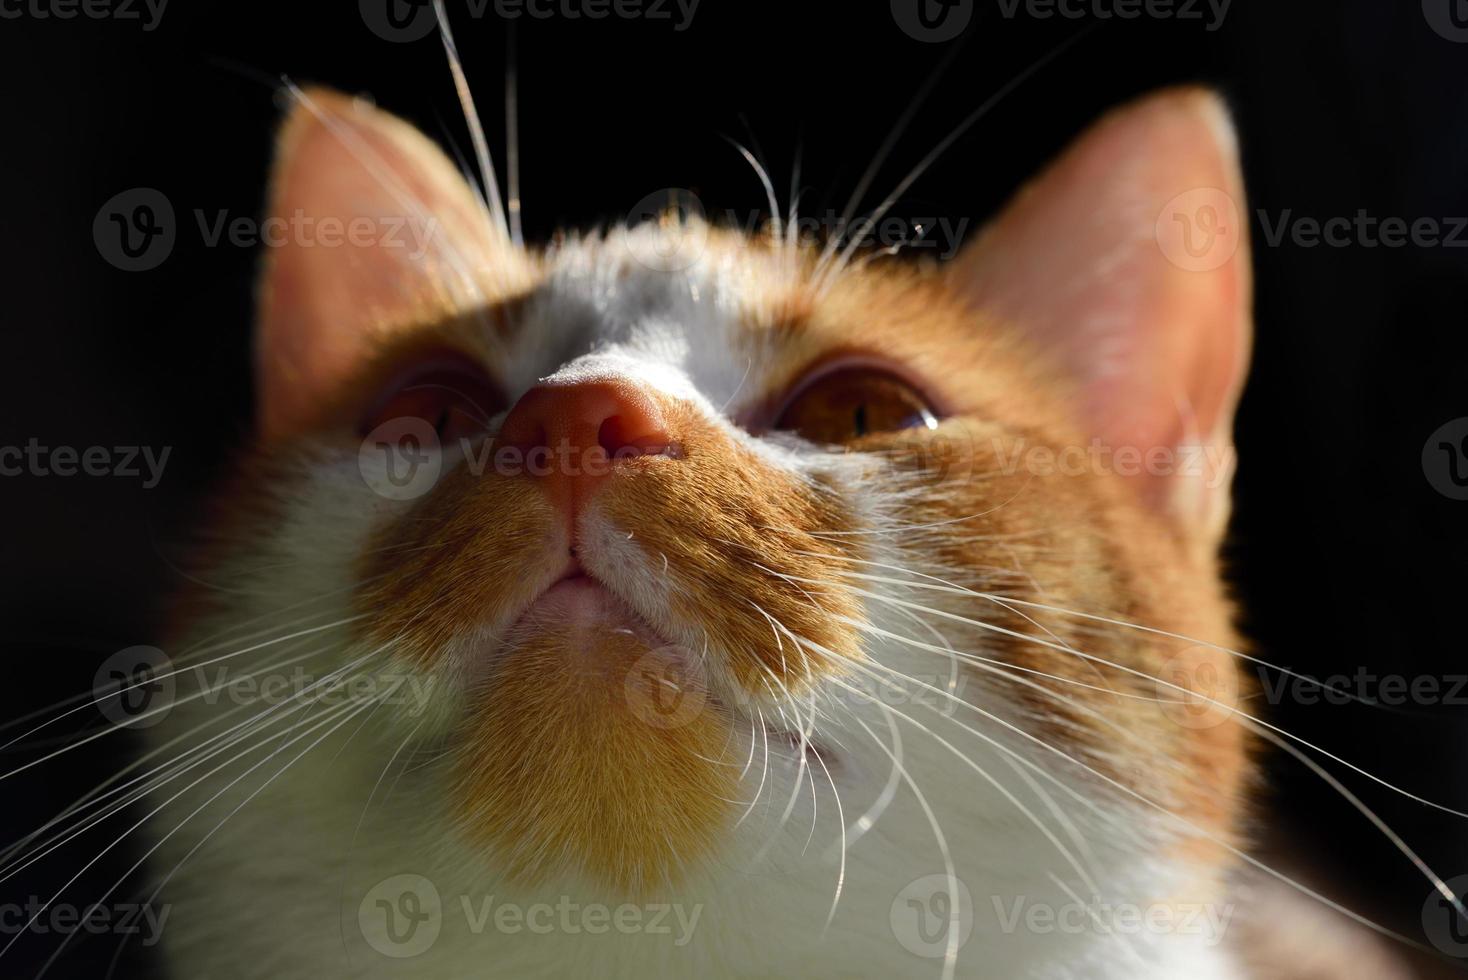 Close-up of a cat's head looking up curiously against a dark background photo